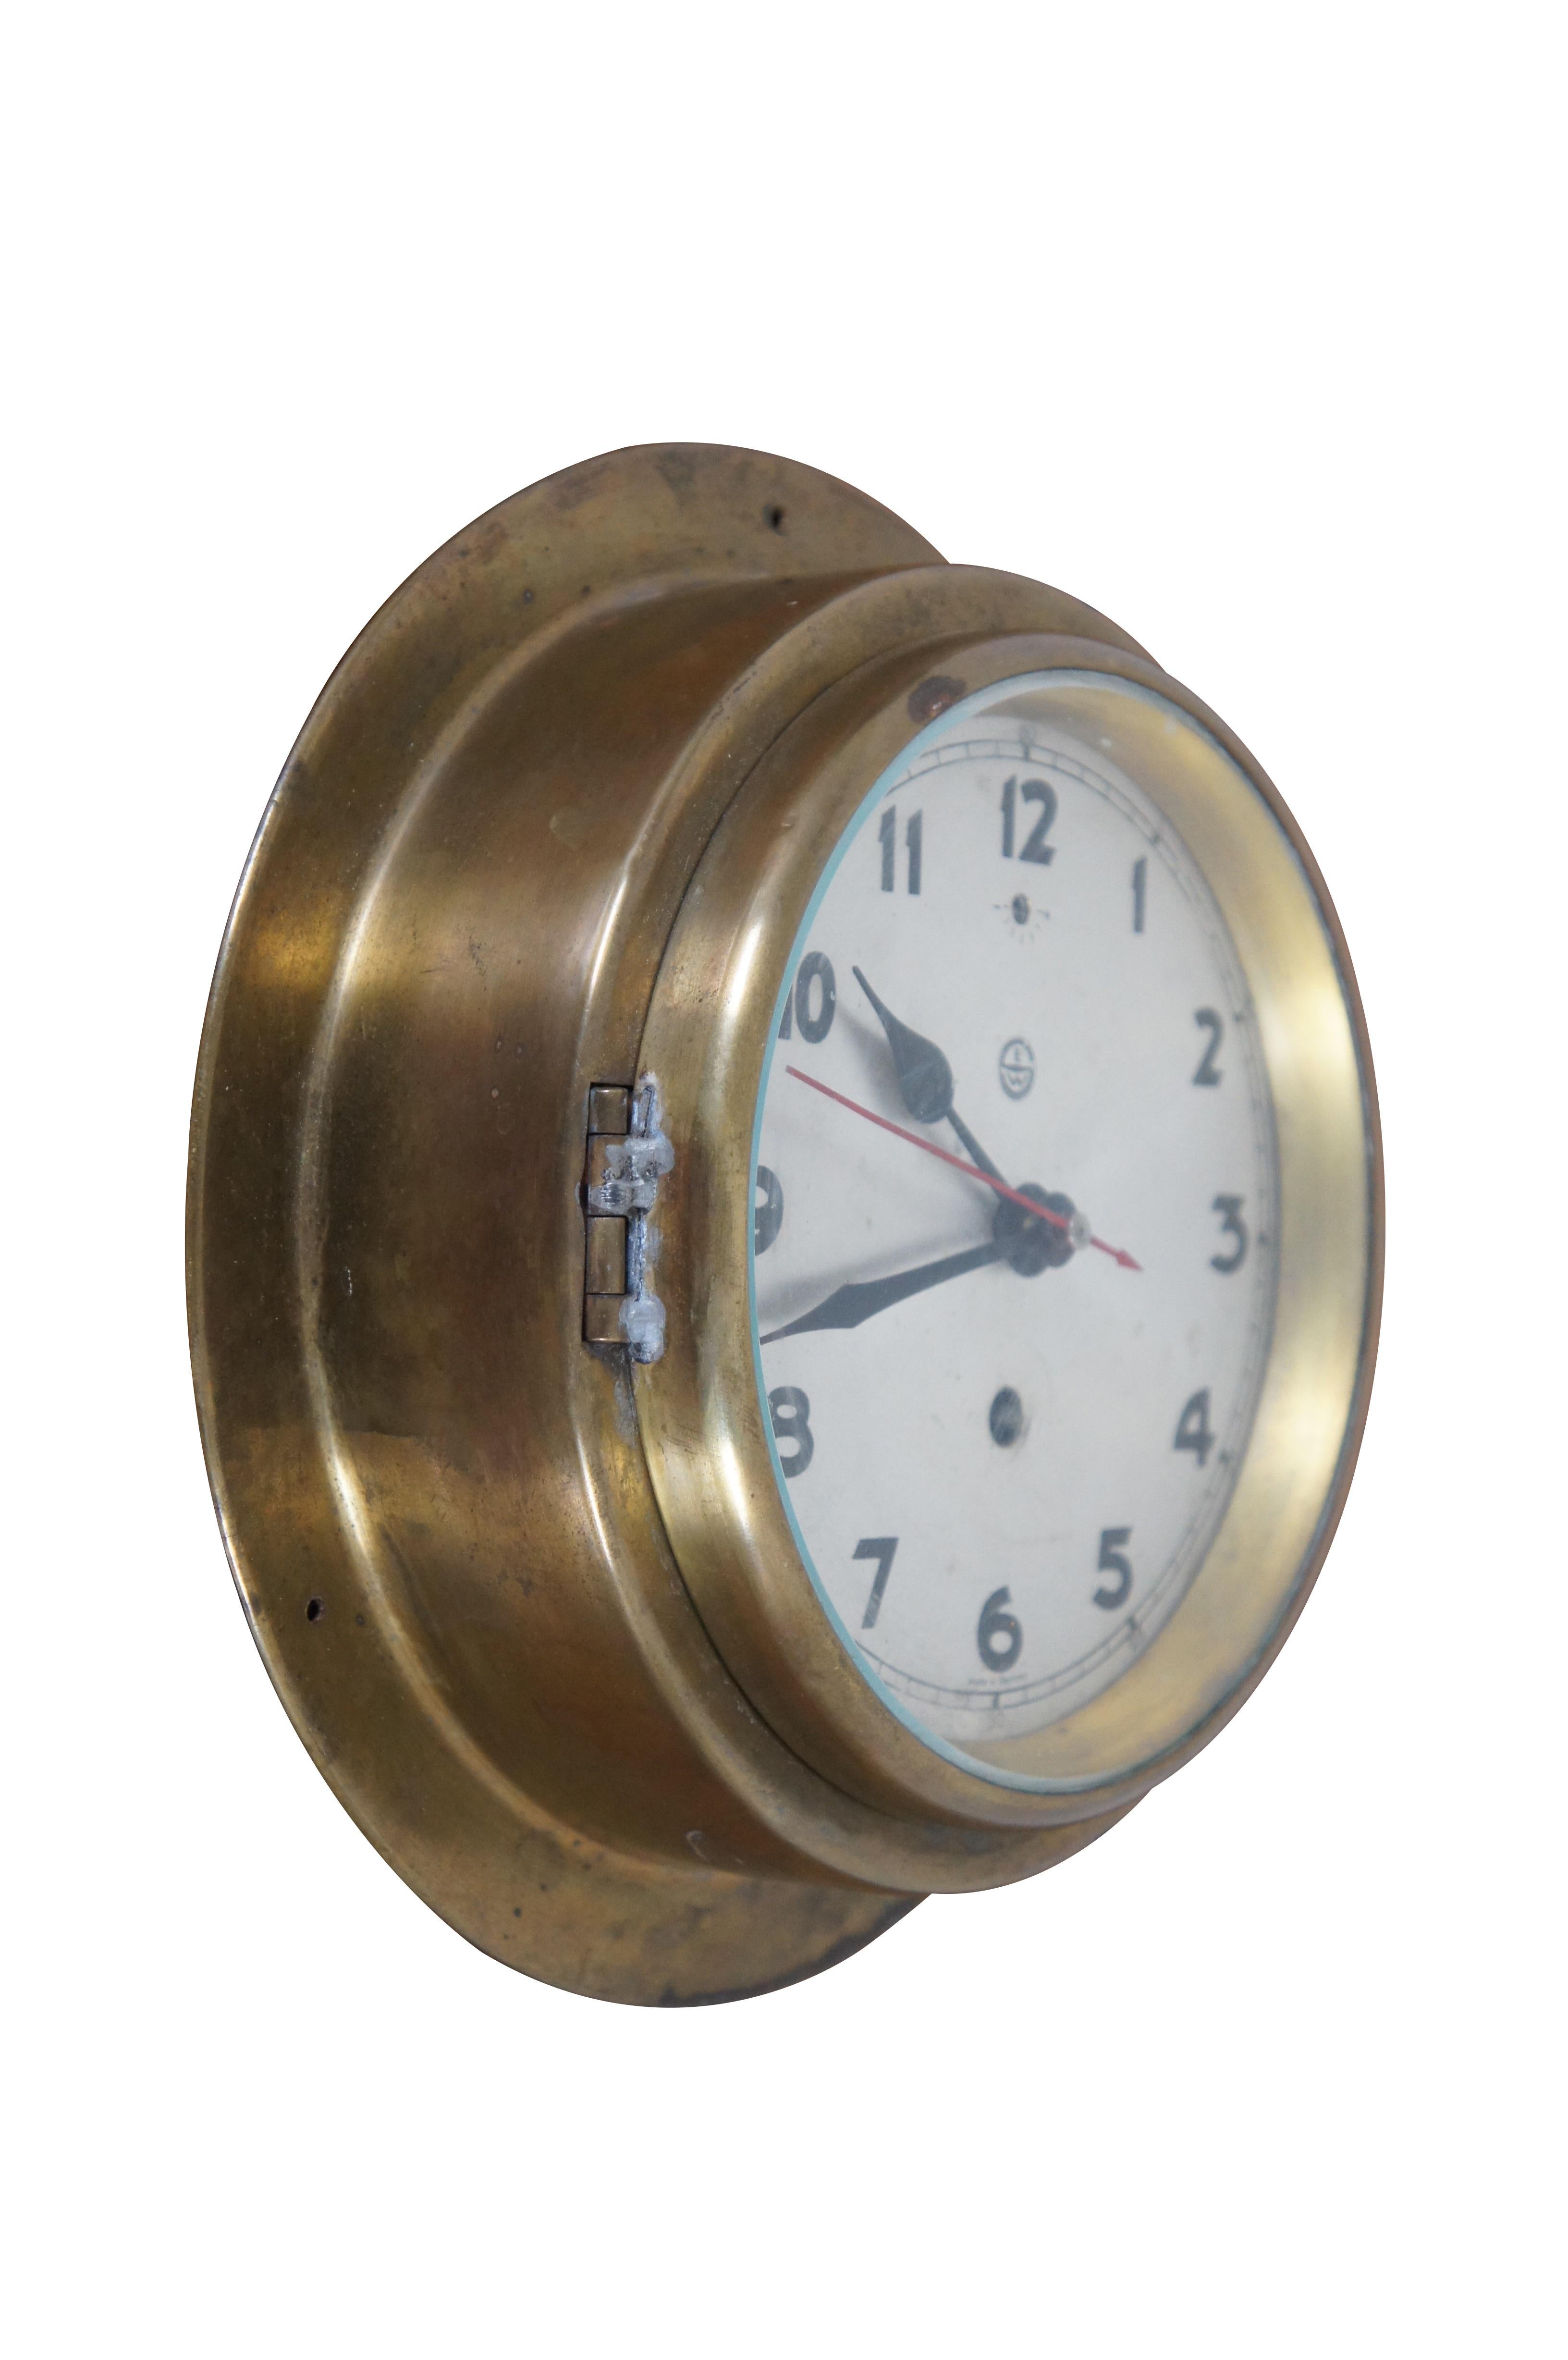 Mid 20th century key wound port hole clock.  Features a brass frame with metal dial and glass window.  Hangs via 3 screw holes at the base.  Marked along the face EW

A porthole, sometimes called bull's-eye window or bull's-eye, is a generally